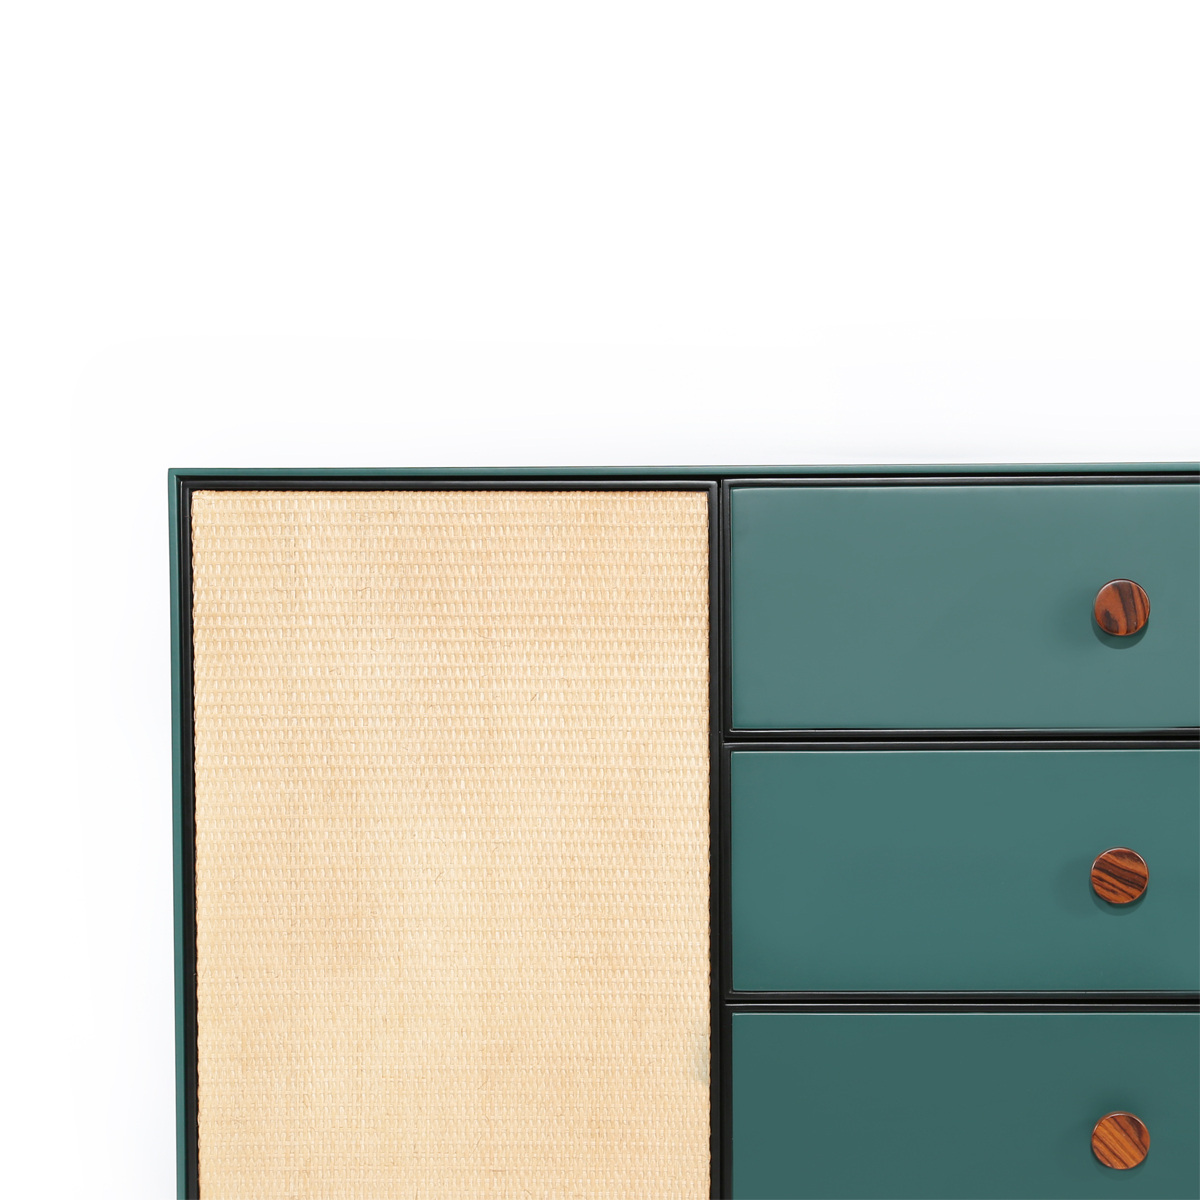 Chest of Drawers Essence, Green / Black - L100 x W45 x H75 cm - Lacquered wood - image 2